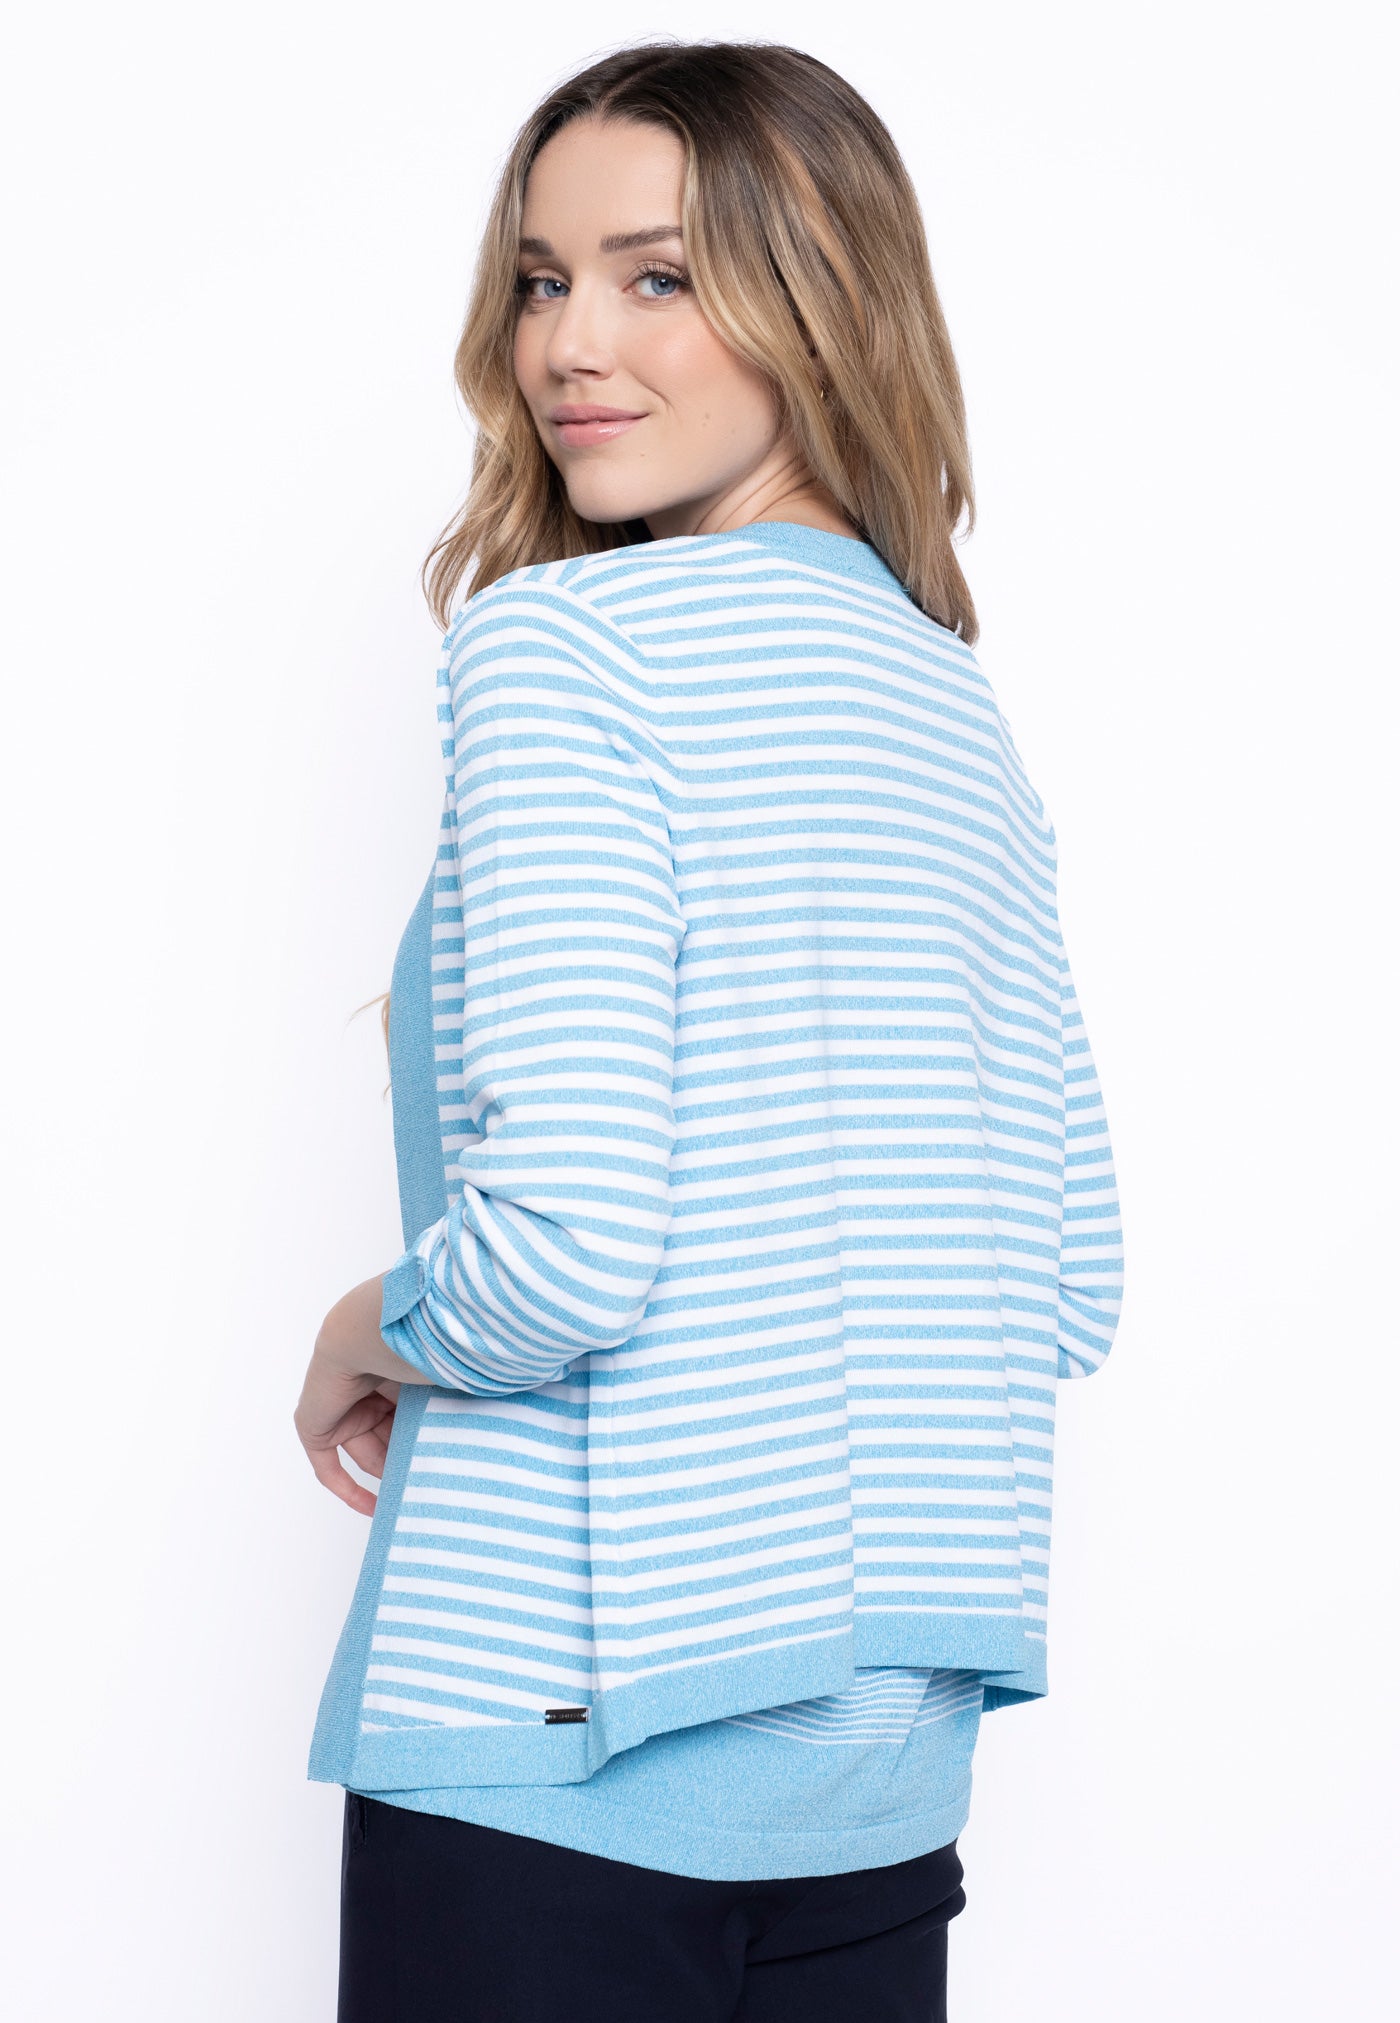 The Open Front Stripe Jacket in Malibu color, a back view.